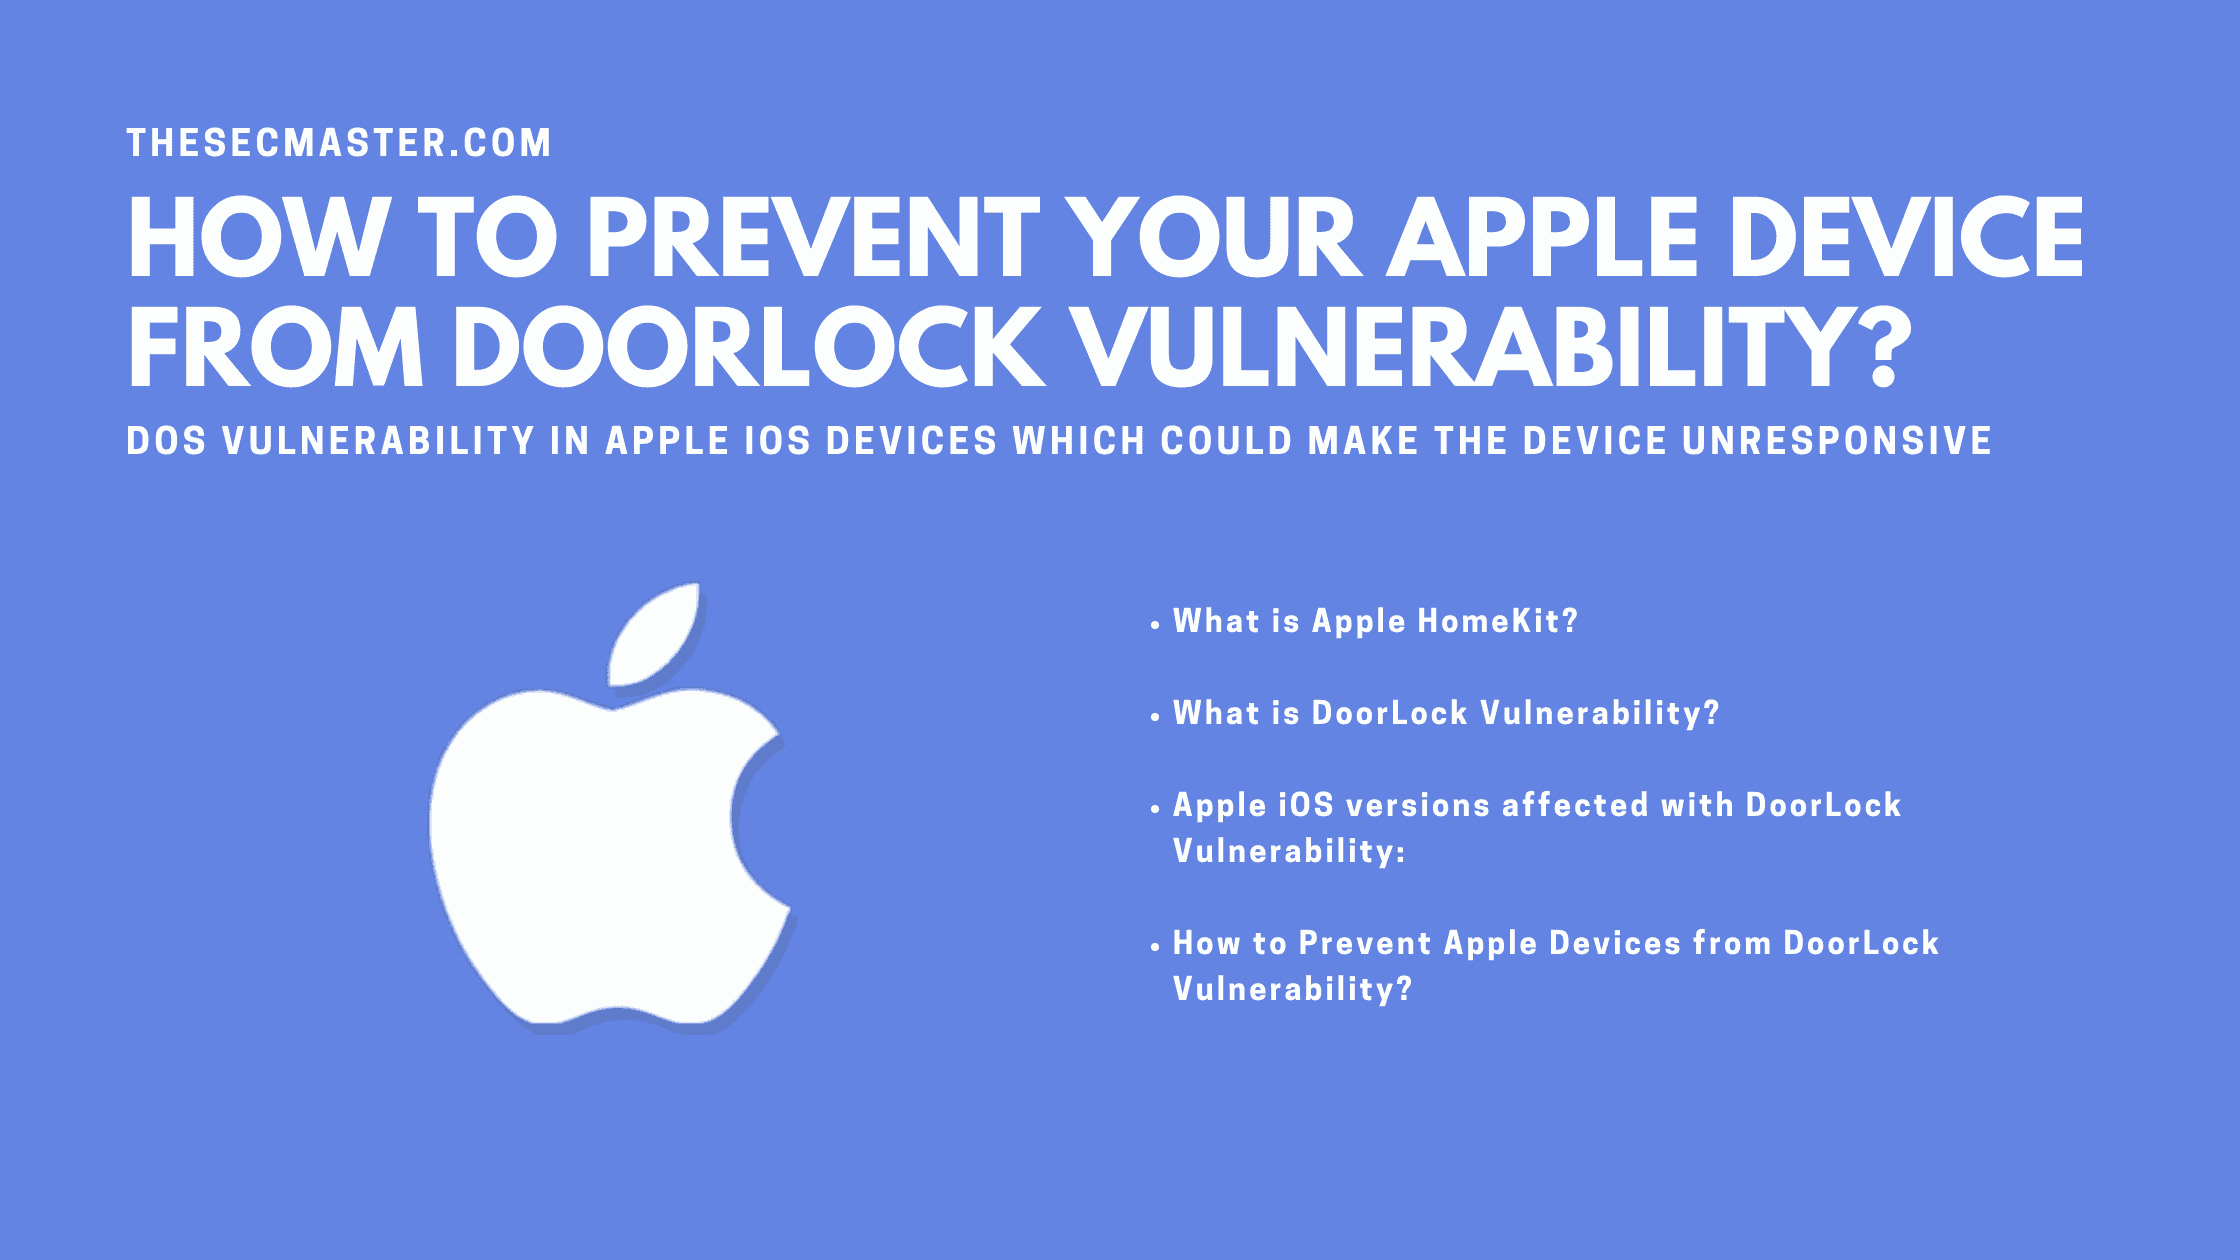 How To Prevent Your Apple Device From Doorlock Vulnerability